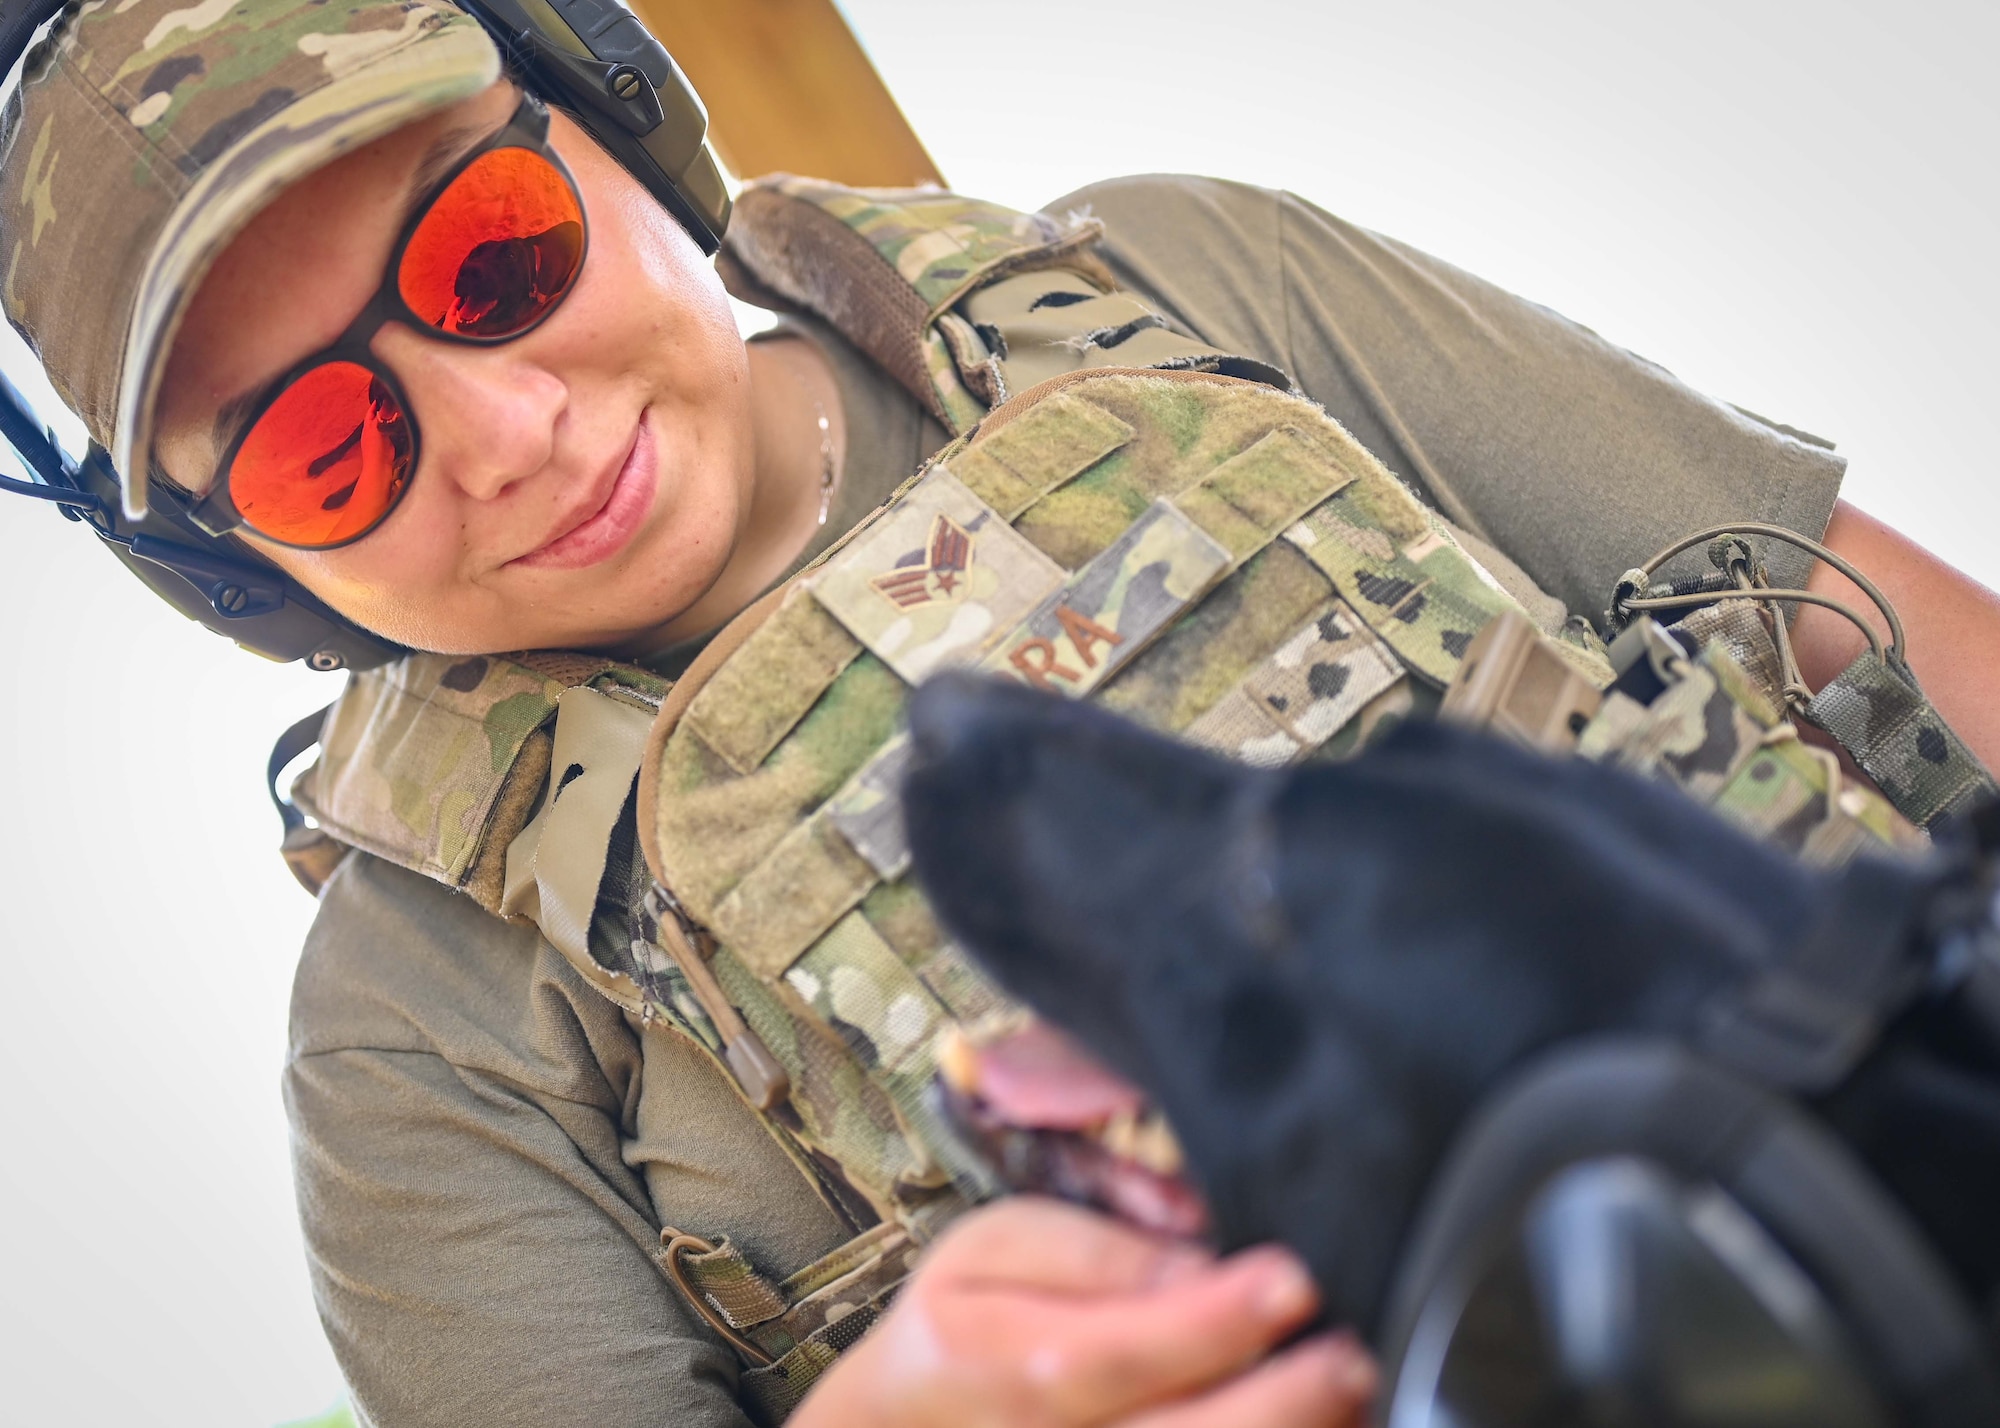 An airman greets her dog before training begins.